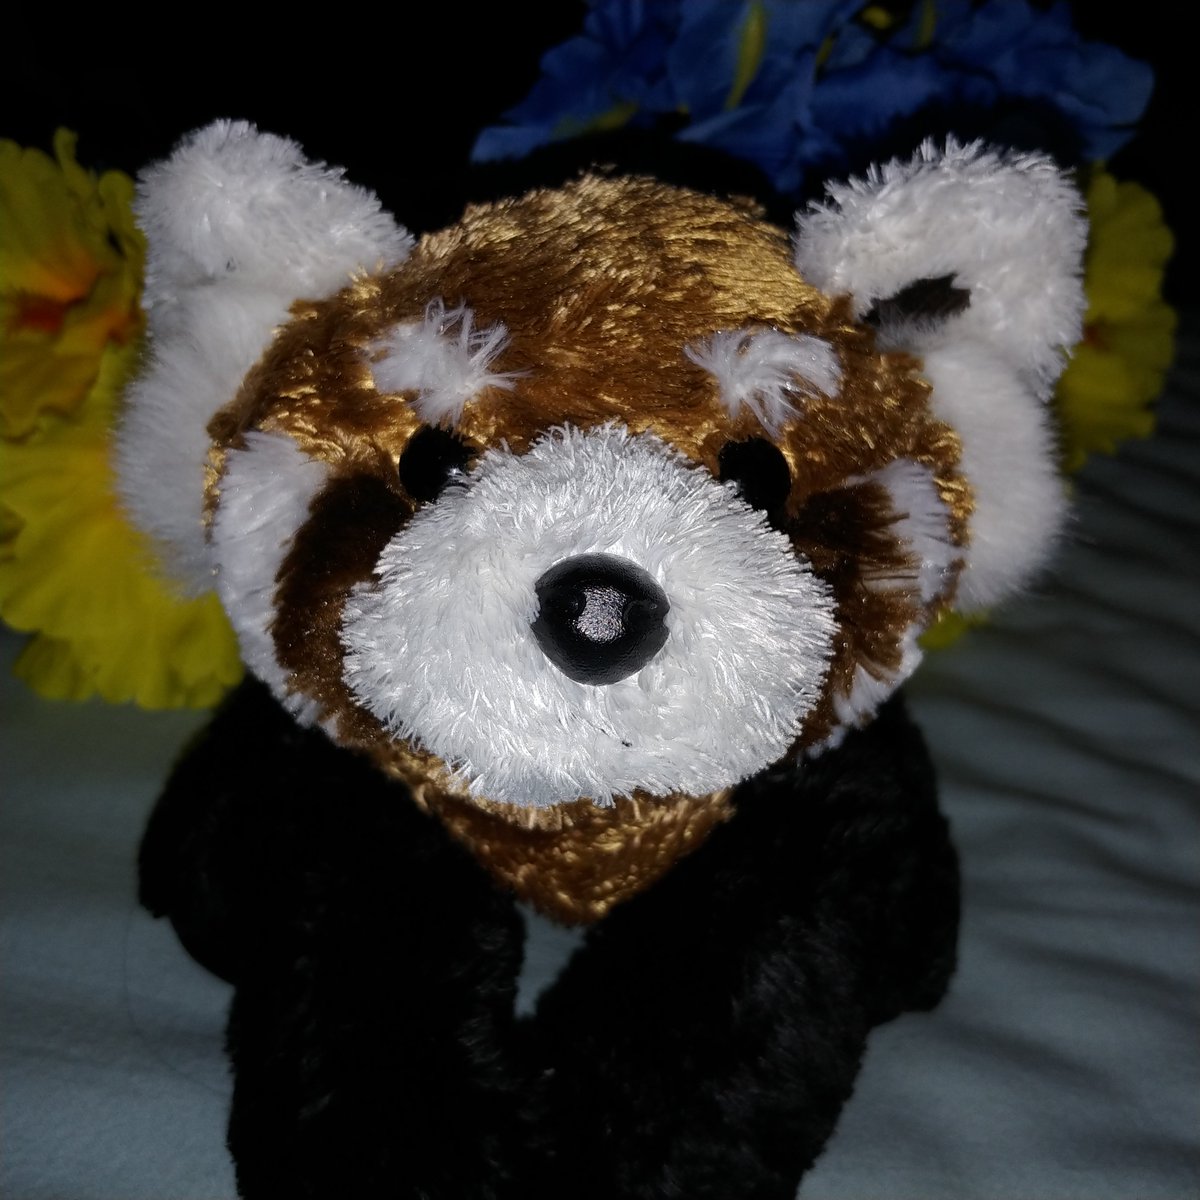 Red pandas are important indicators of the vibrant forests in the Eastern Himalayas. #SaveTheRedPanda #IRPD2019

A plush red panda isn't quite a patch on the real ones. Lets help those cuties out in the wild.